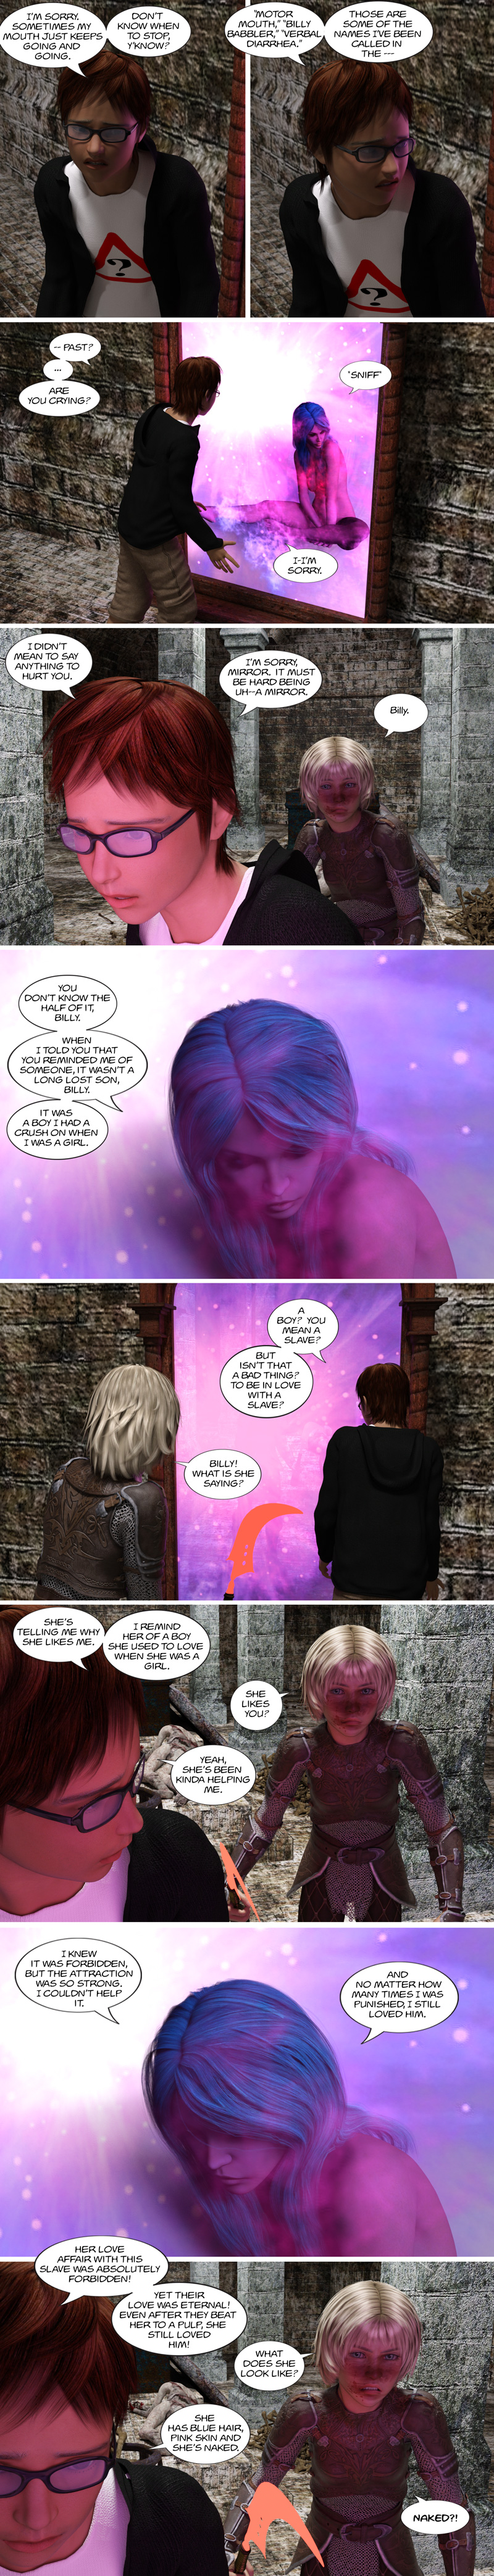 Chapter 12, page 30 – Mirror and Billy chat